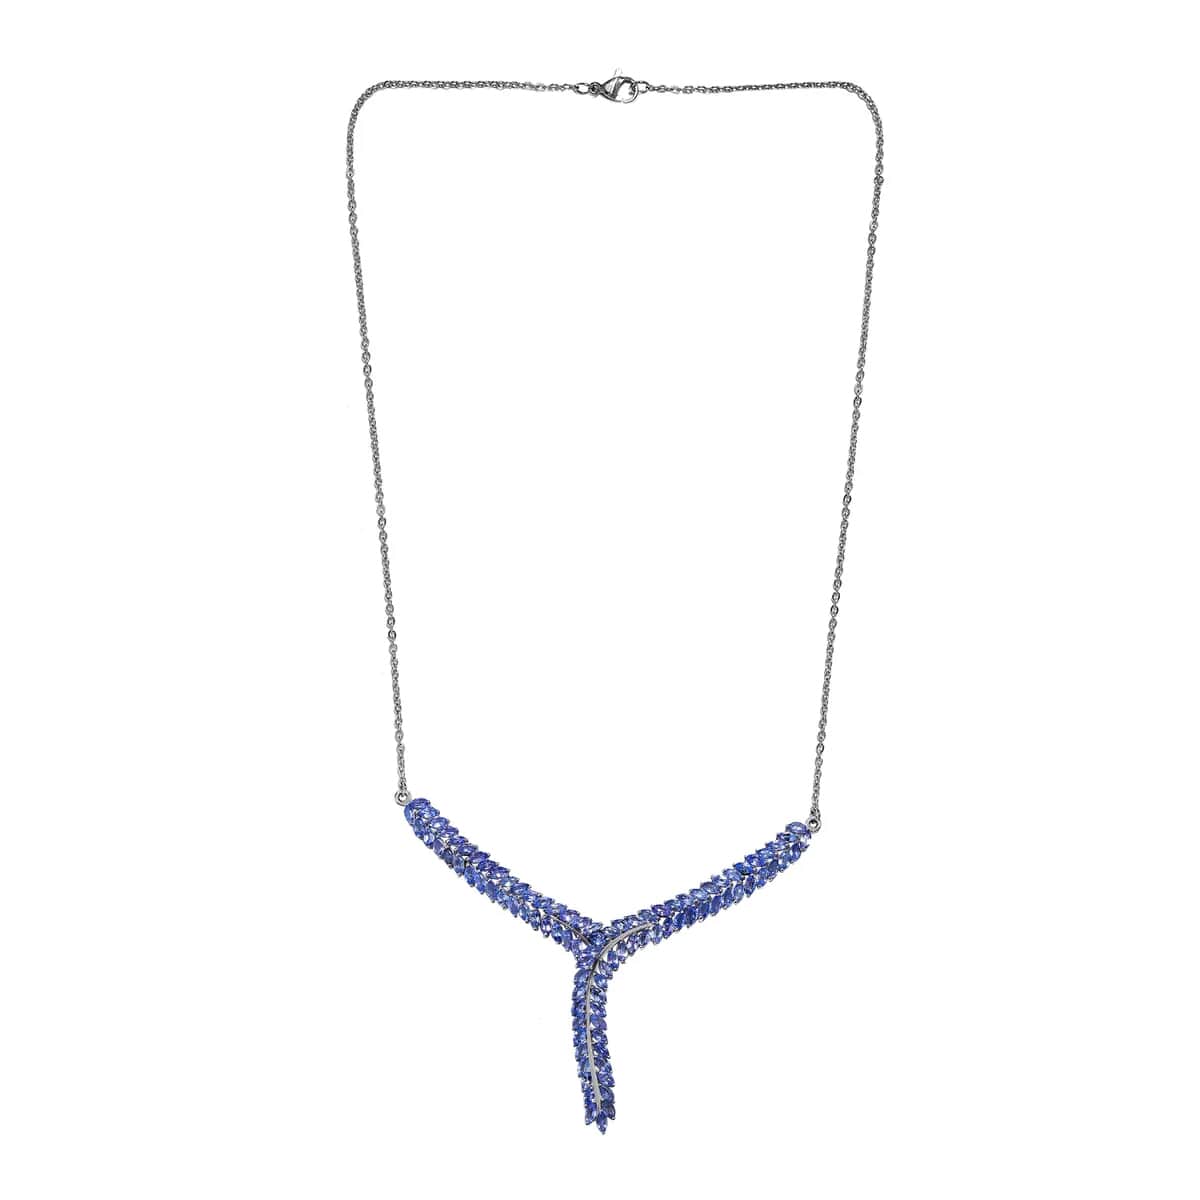 Karis Tanzanite Y-Shaped Necklace, 18 Inch Necklace in Platinum Bond, Tanzanite Jewelry, Gifts For Her 7.25 ctw image number 4